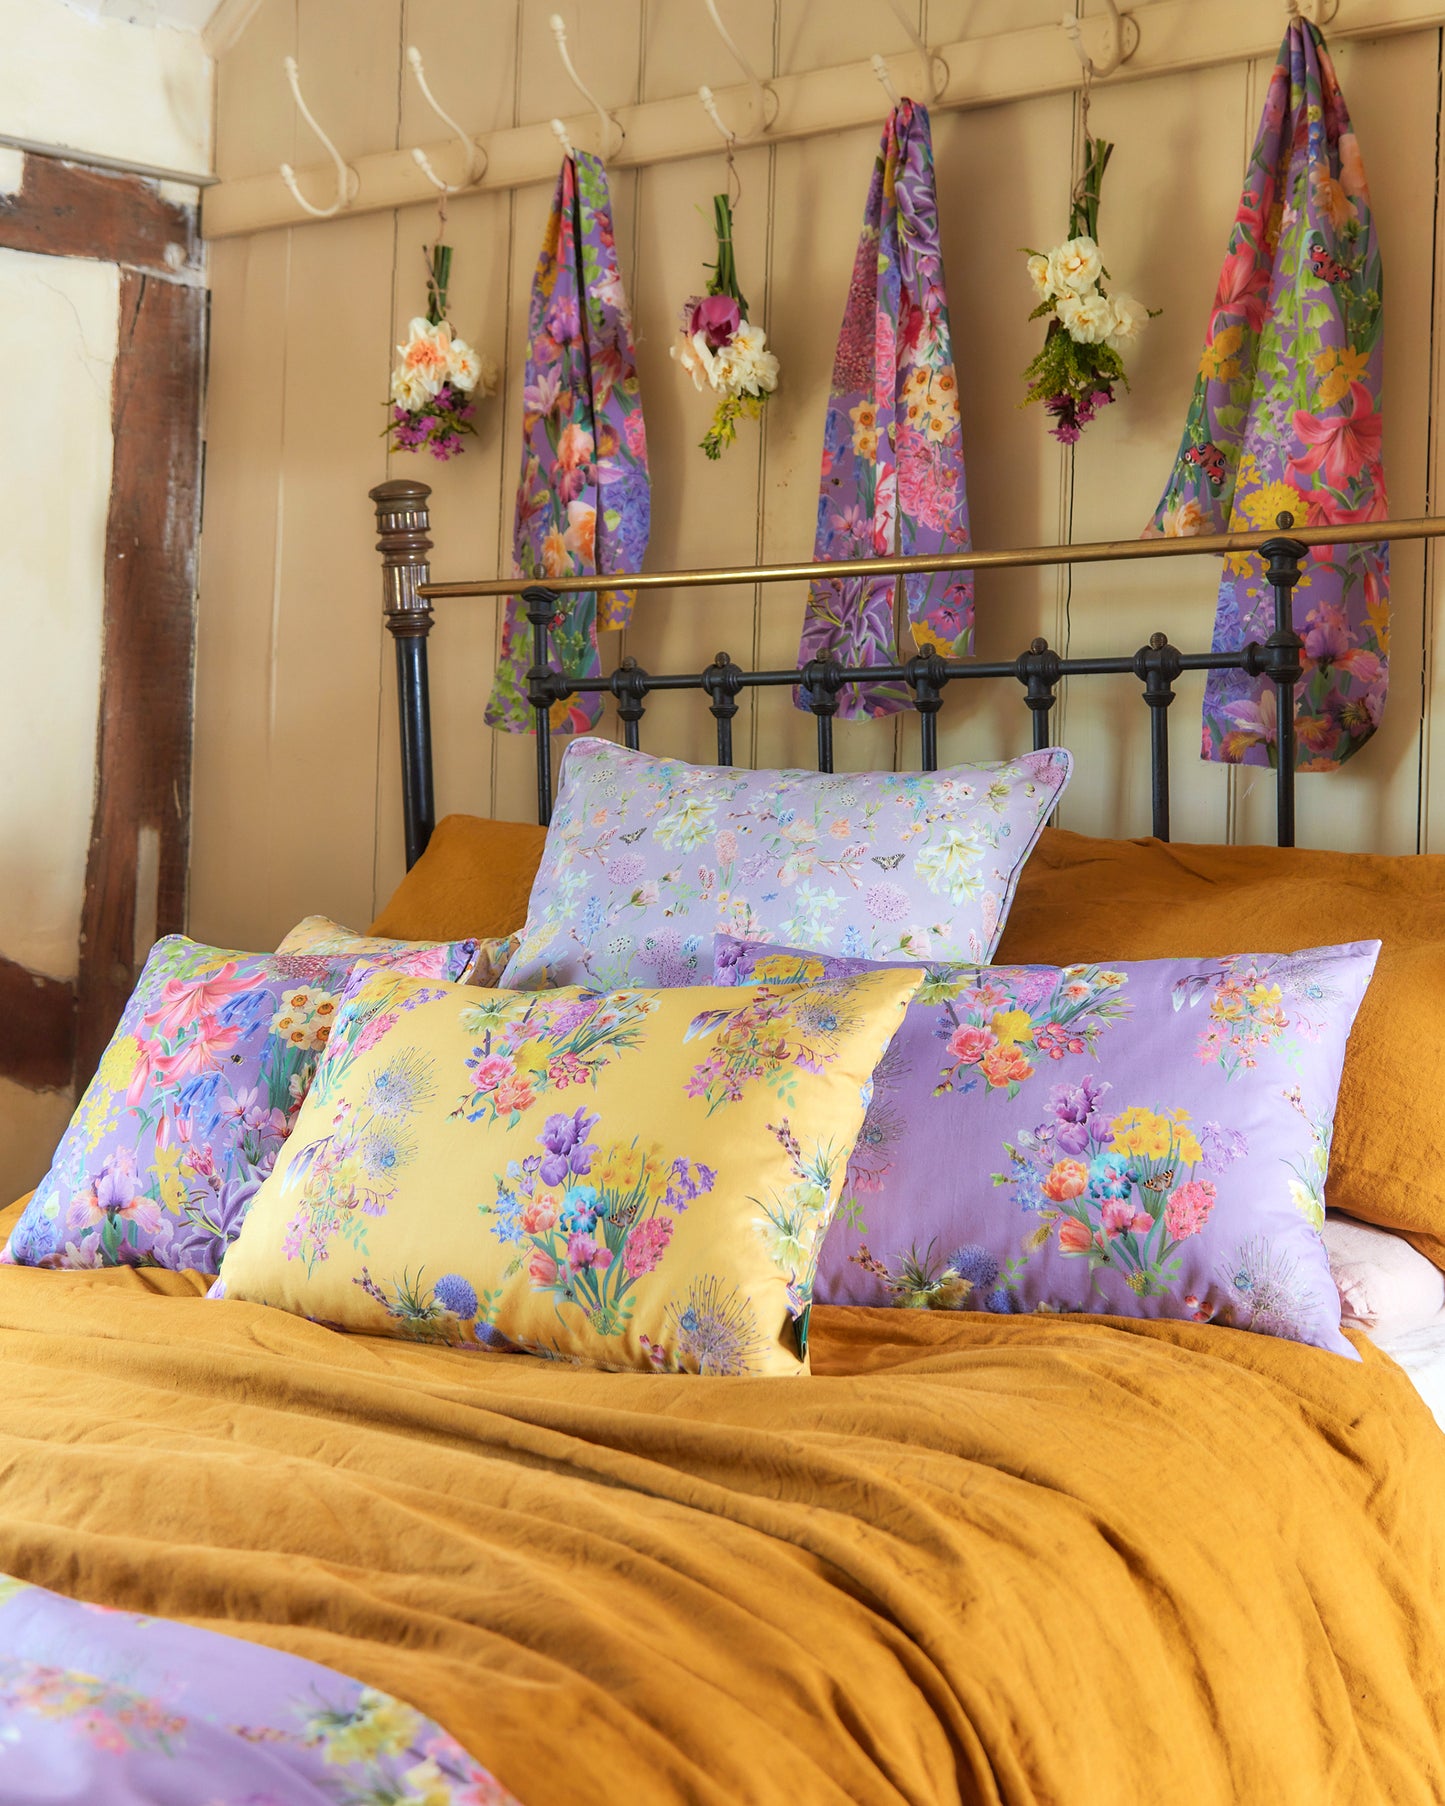 Energising bedroom interior design inspiration filled with yellow and purple soft furnishings in luxury floral prints